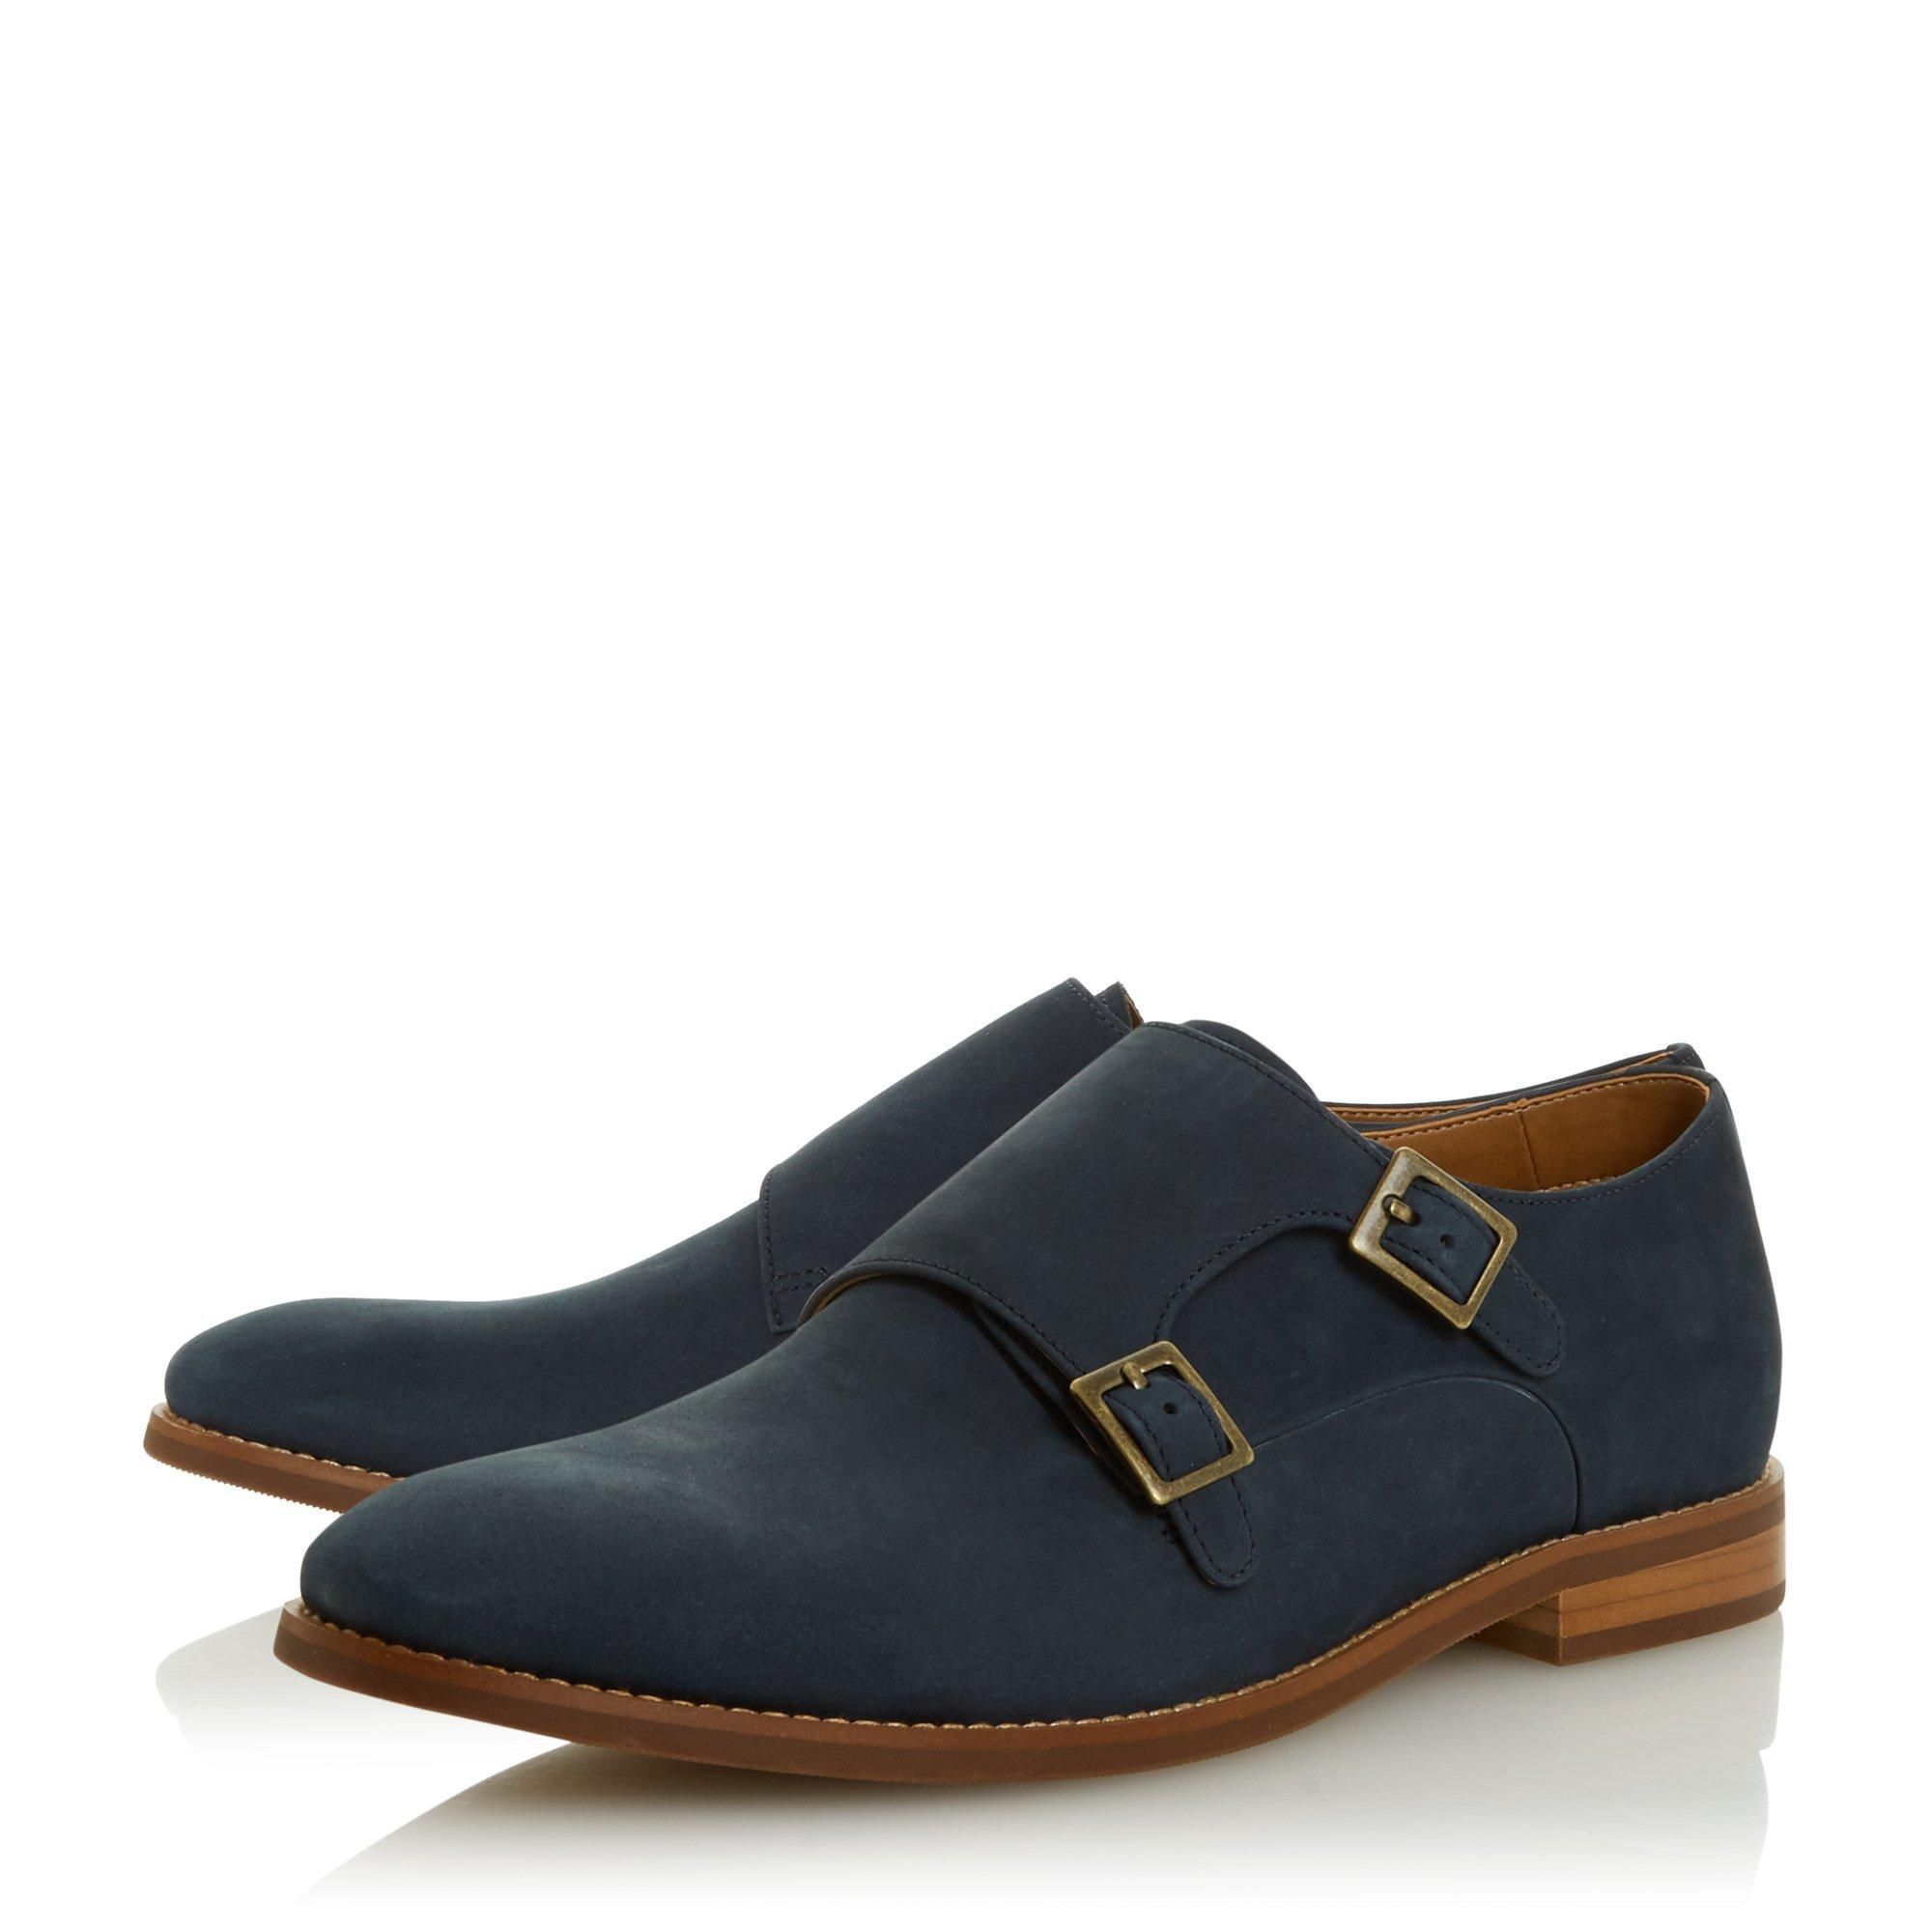 Upgrade your smart-casual wardrobe with this stylish monk shoe from Dune. Designed with a double buckle fastening and a textured upper. A stacked block heel and contrast sole finish the dapper design.